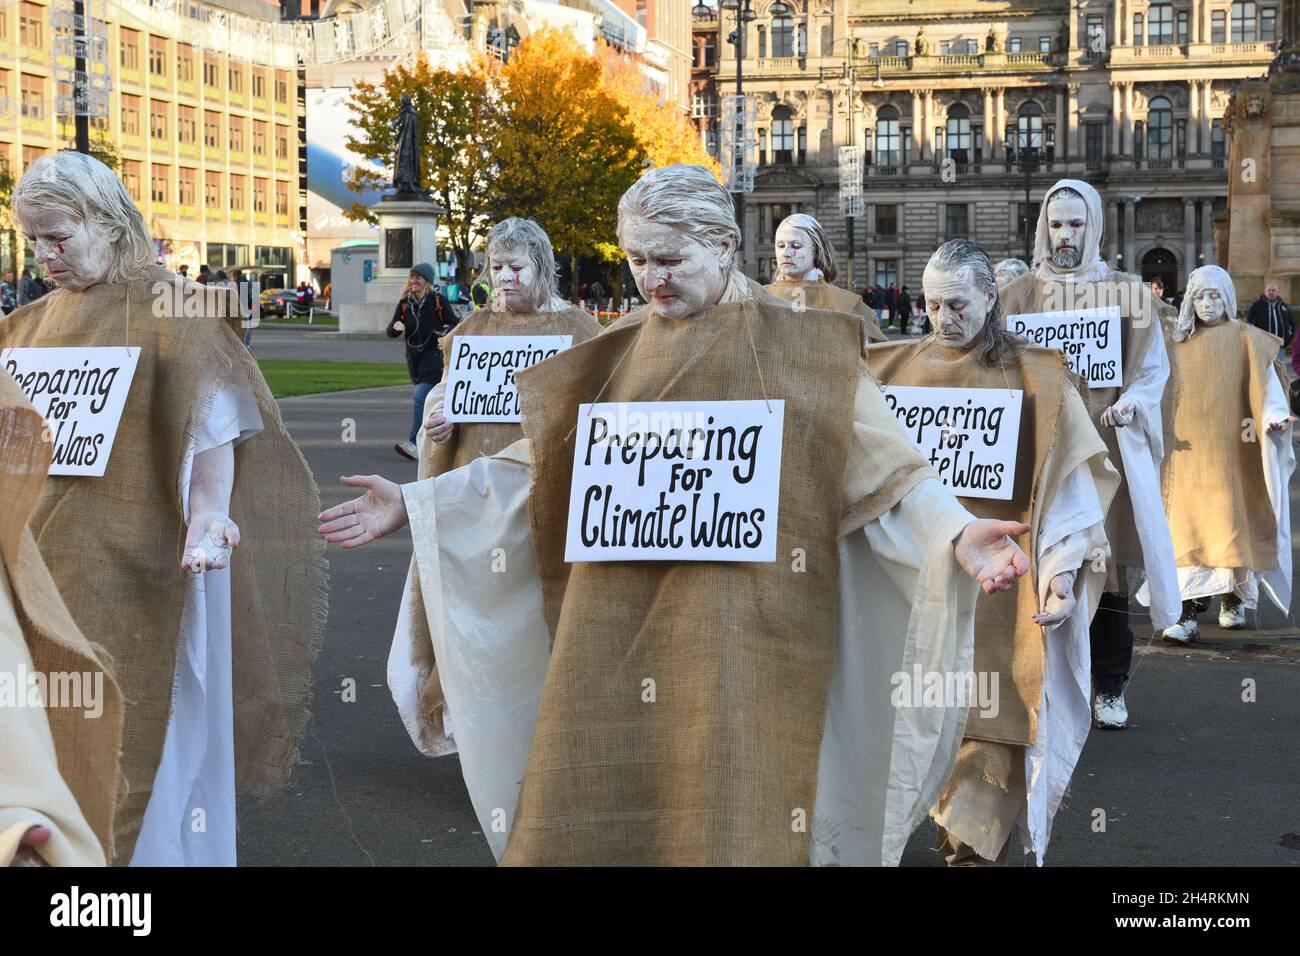 Glasgow, UK. 4th Nov, 2021. UK. Climate change interest group making statement by dressing in doomsday costumes and carrying placards saying 'Preparing for climate wars'. Credit. Credit: Douglas Carr/Alamy Live News Stock Photo